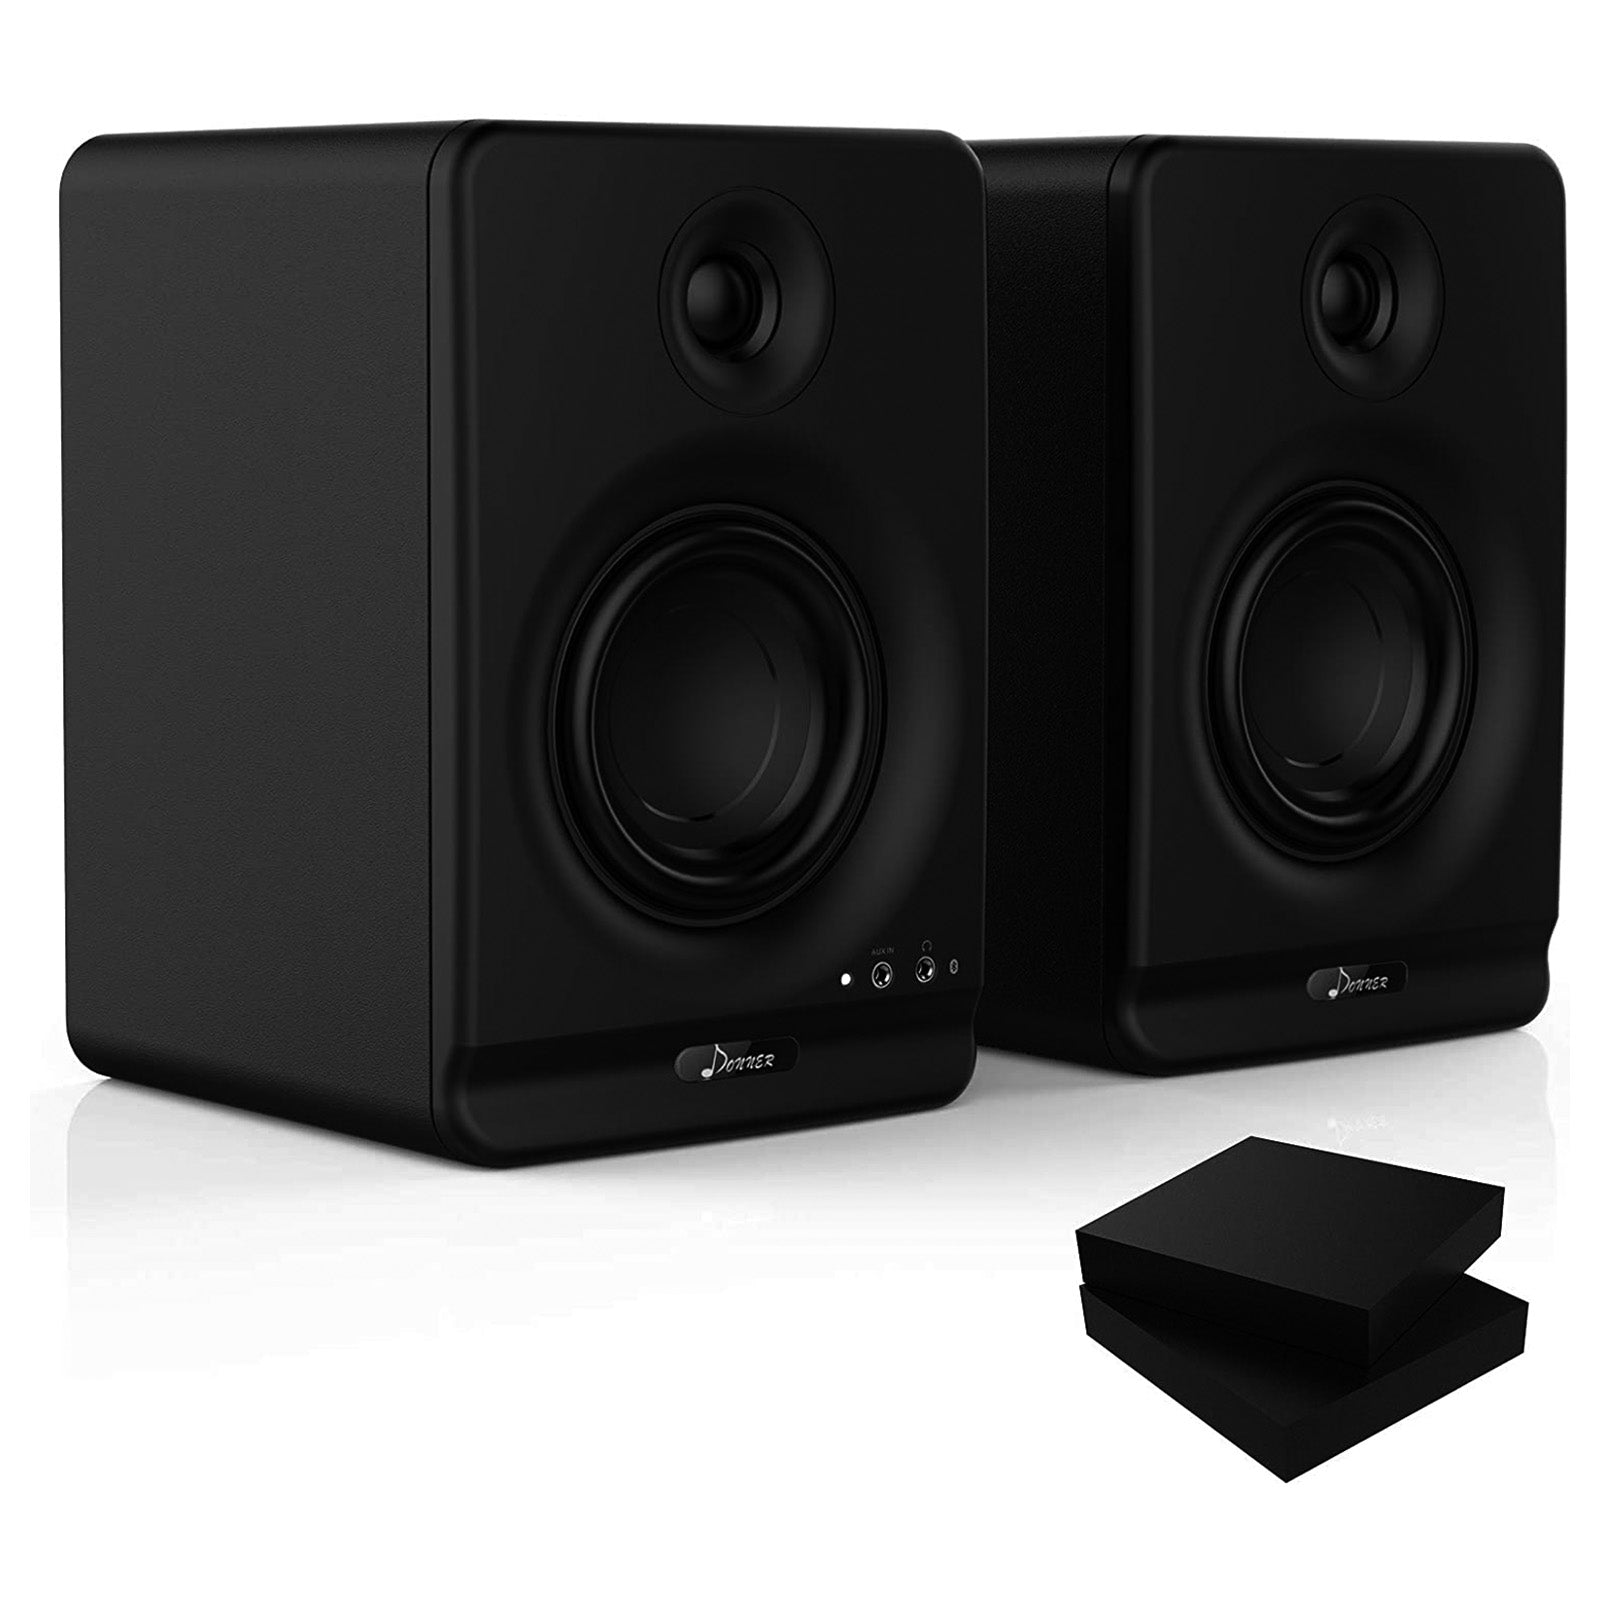 

Donner Studio 4" Near Field Studio with CSR 5.0 Bluetooth, for Music Production, Live Streaming and Podcasting, 2-Pack,New Version(Dyna4 Black)